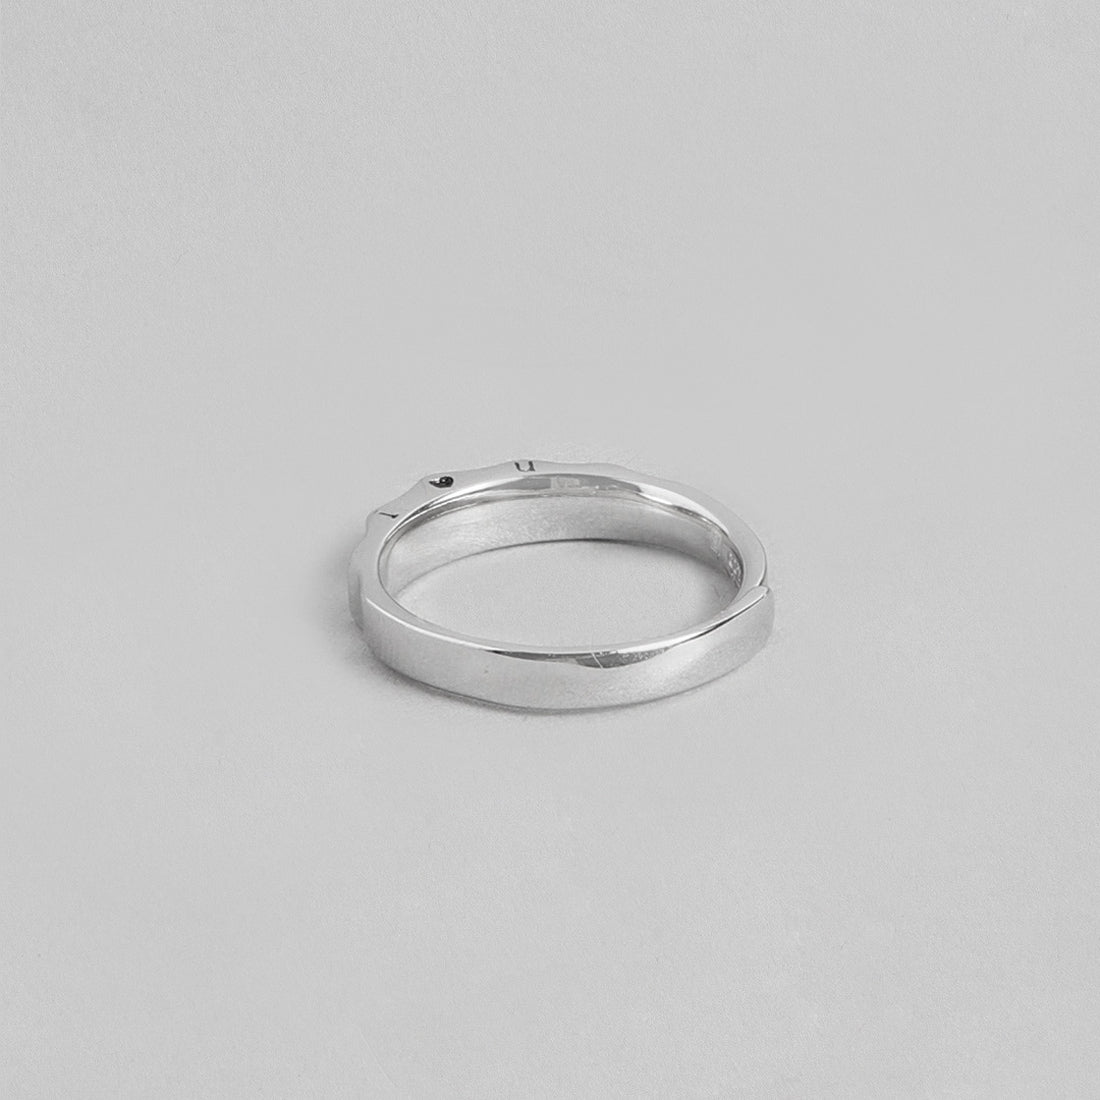 Minimalistic Rhodium Plated 925 Sterling Silver Ring For Him (Adjustable)